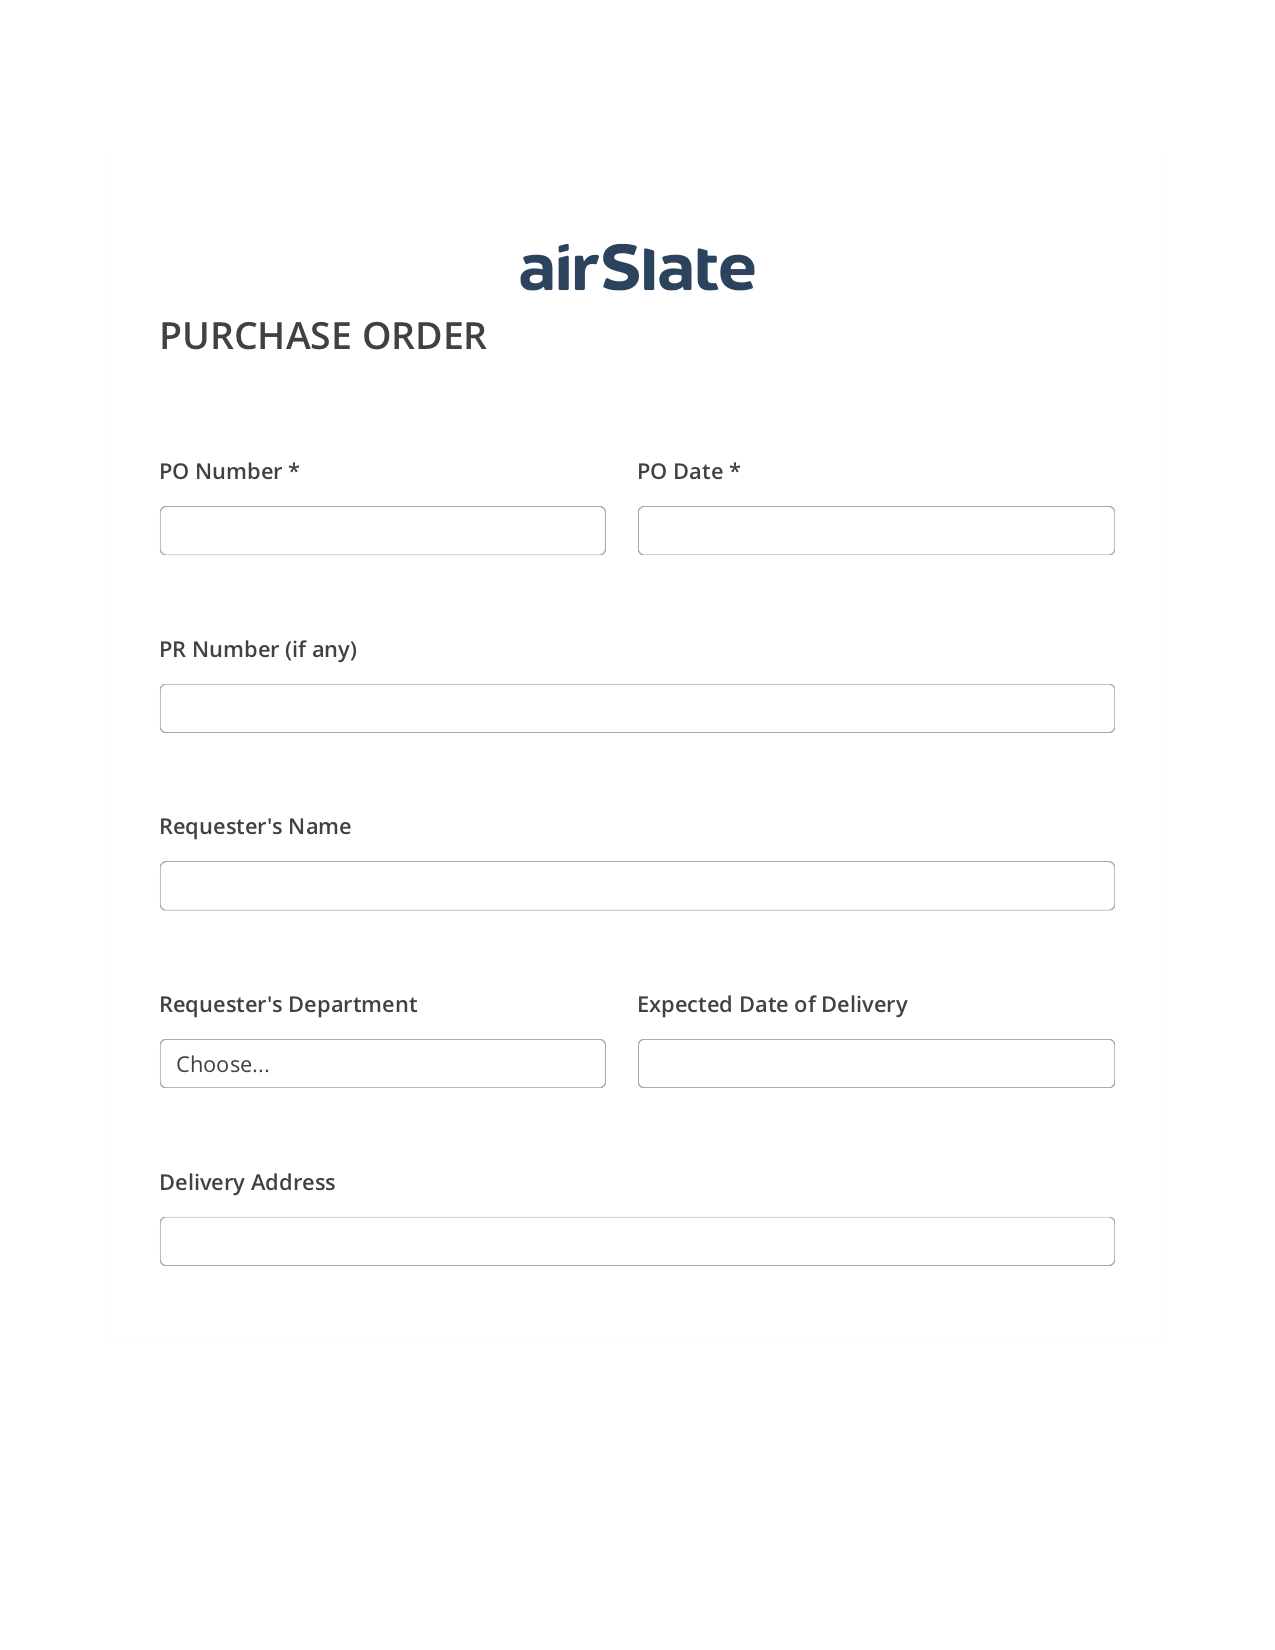 Item Purchase Order Flow Unassign Role Bot